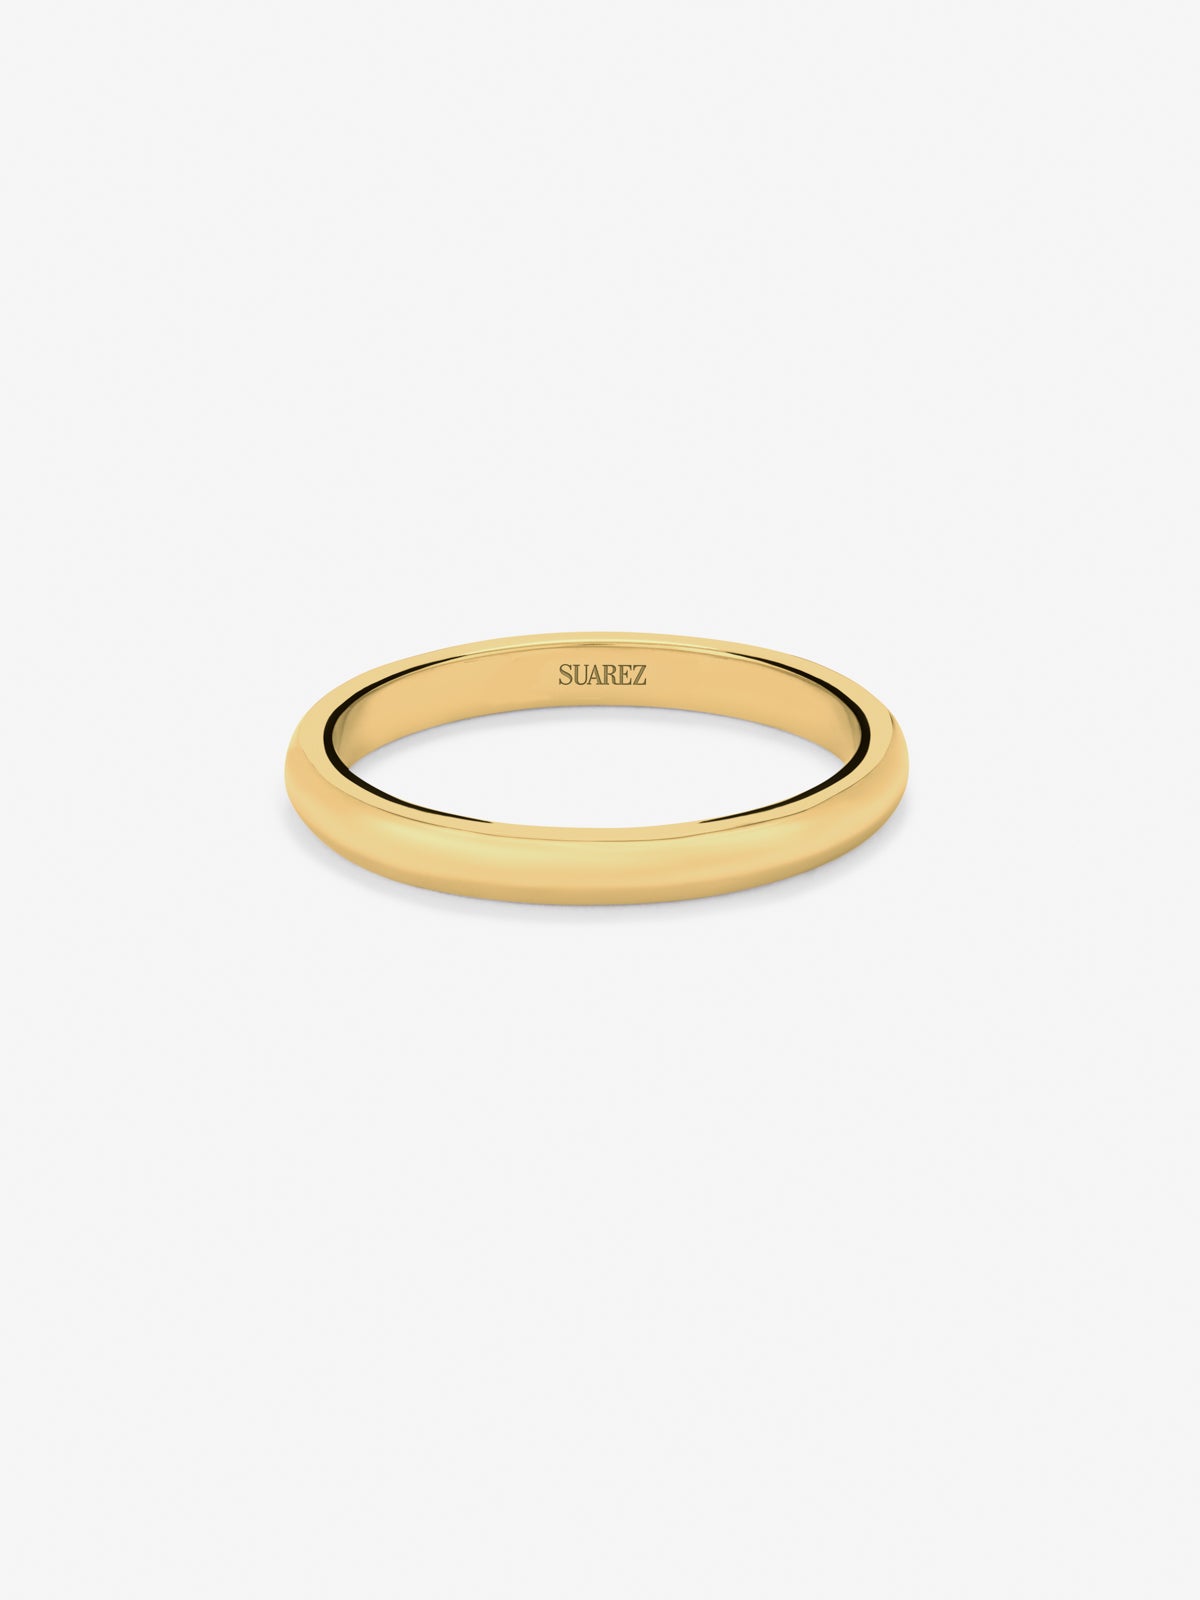 18K 1.55mm yellow flat compromise ring